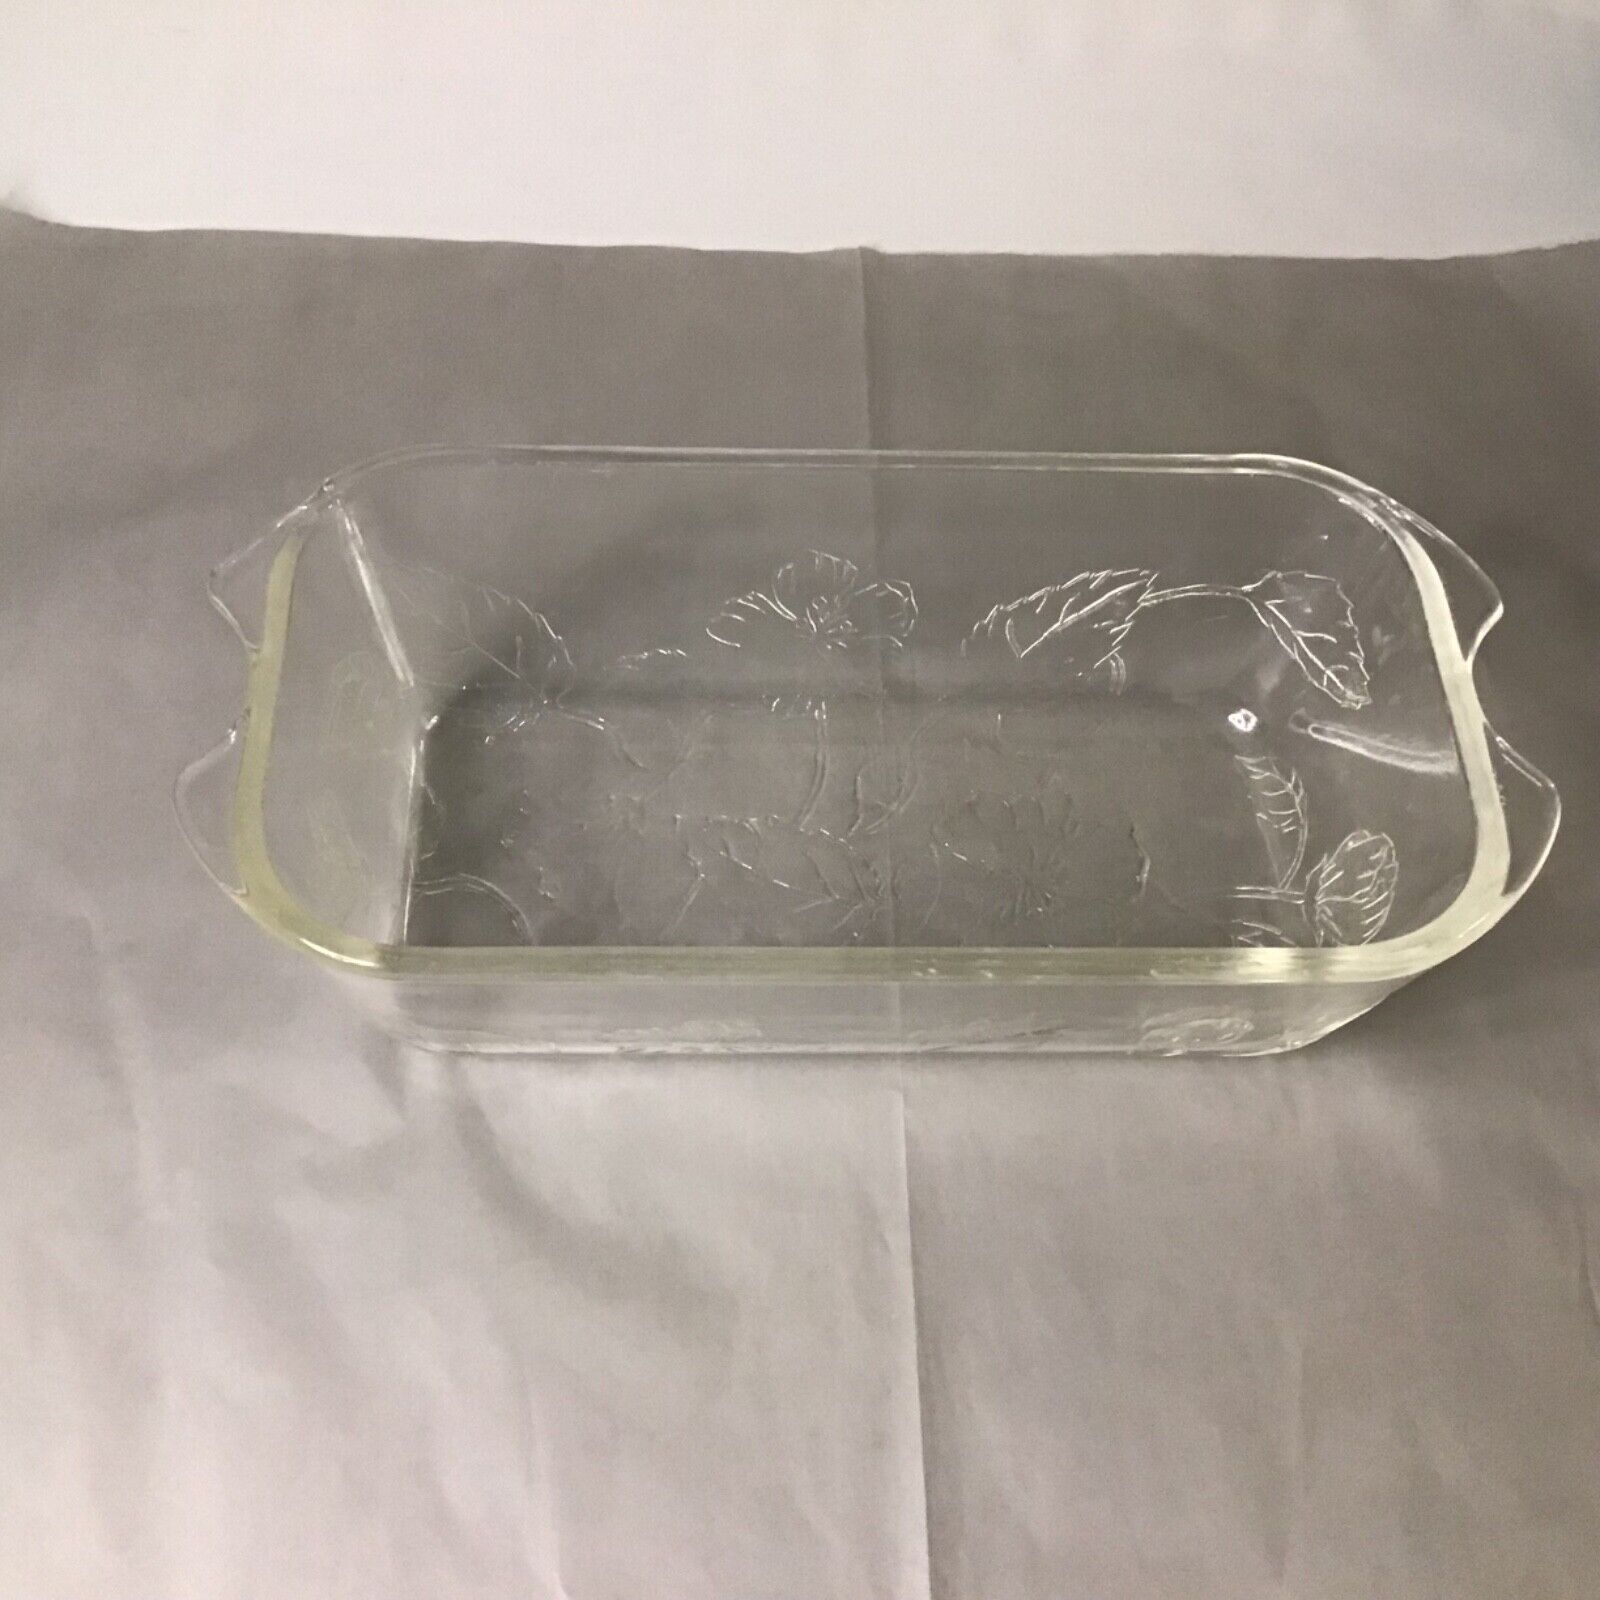 VTG 1940s McKee Sears Roebuck Glass Loaf Baking Dish Etched Flowers MCM